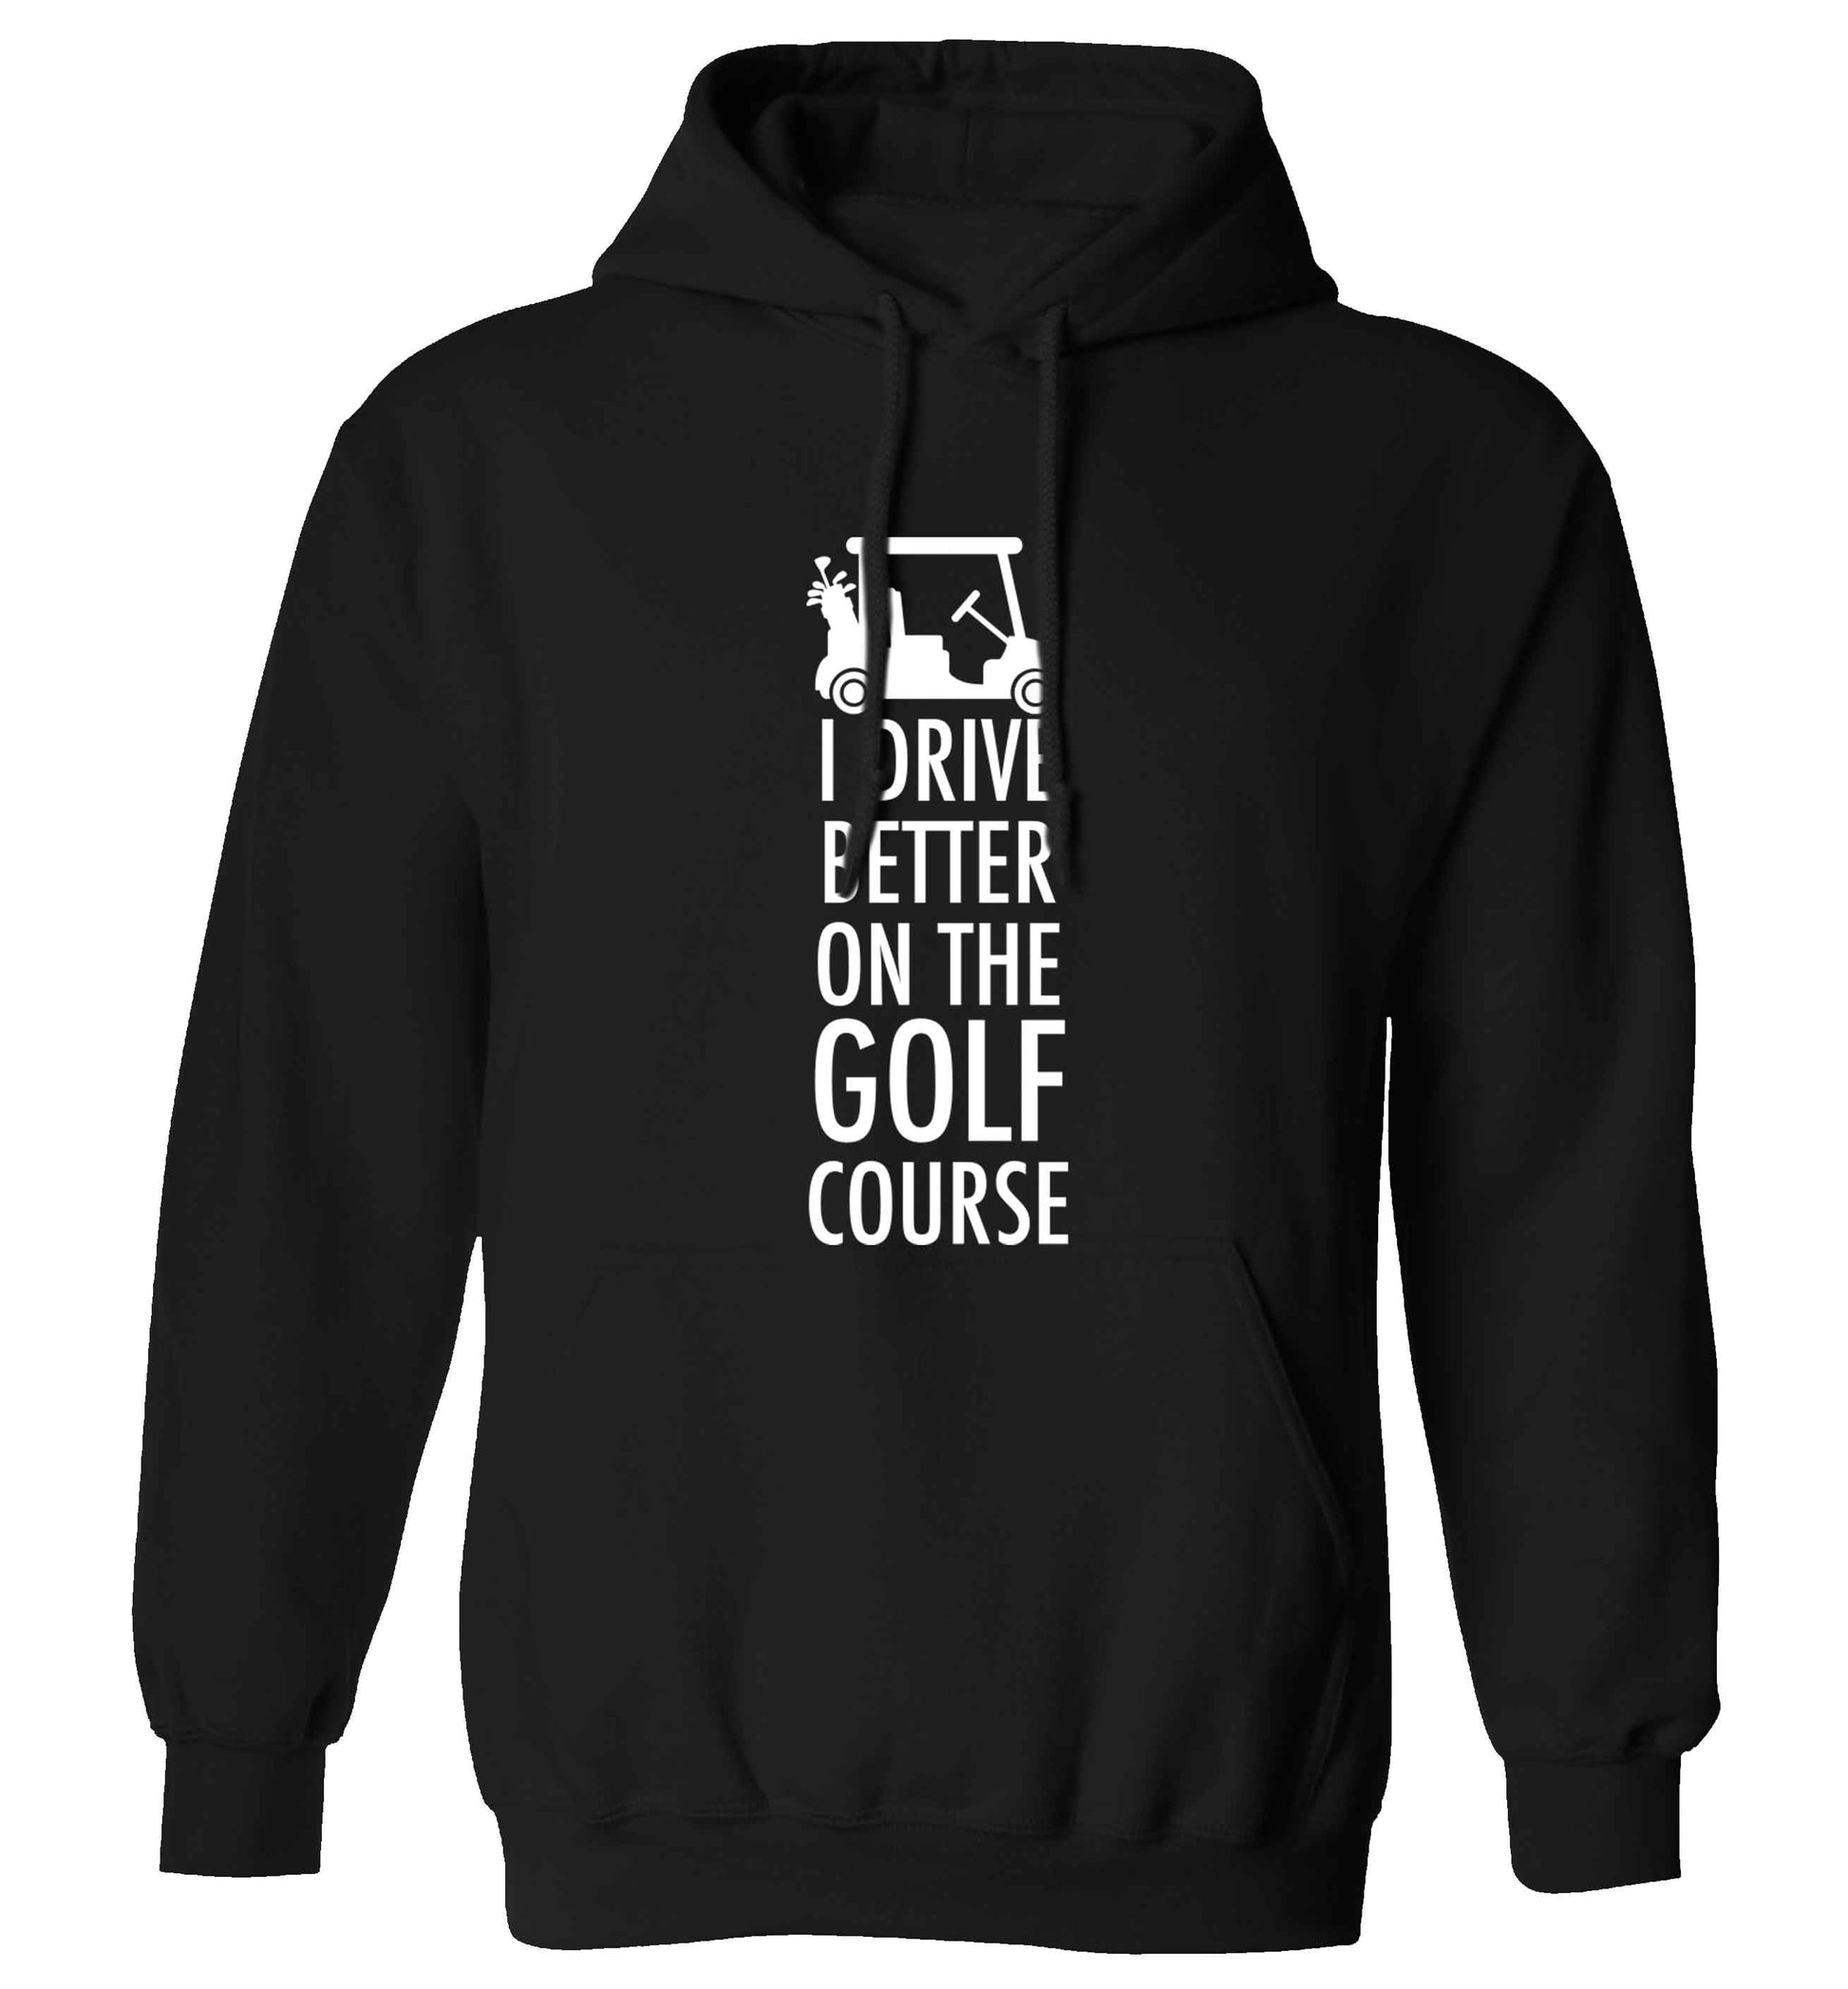 I drive better on the golf course adults unisex black hoodie 2XL